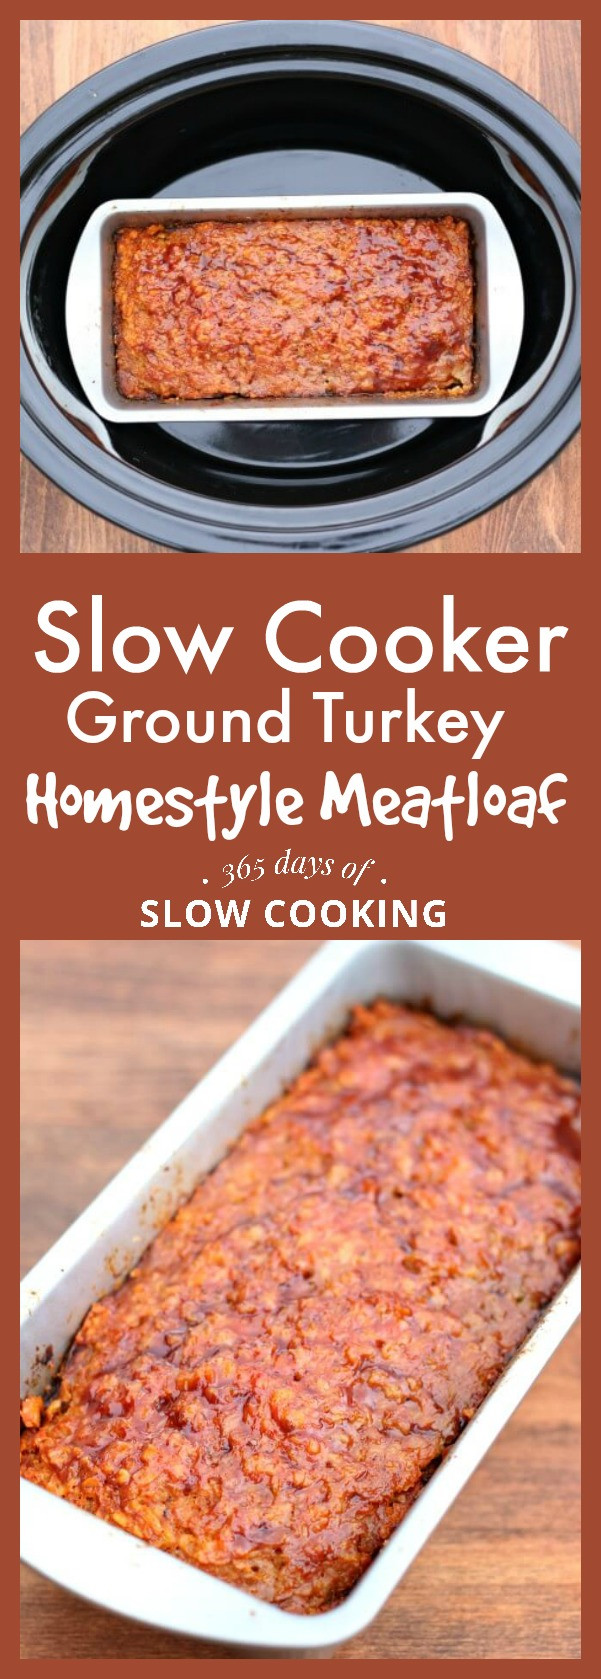 Ground Turkey Crock Pot Recipes
 Slow Cooker Homestyle Ground Turkey or Beef Meatloaf